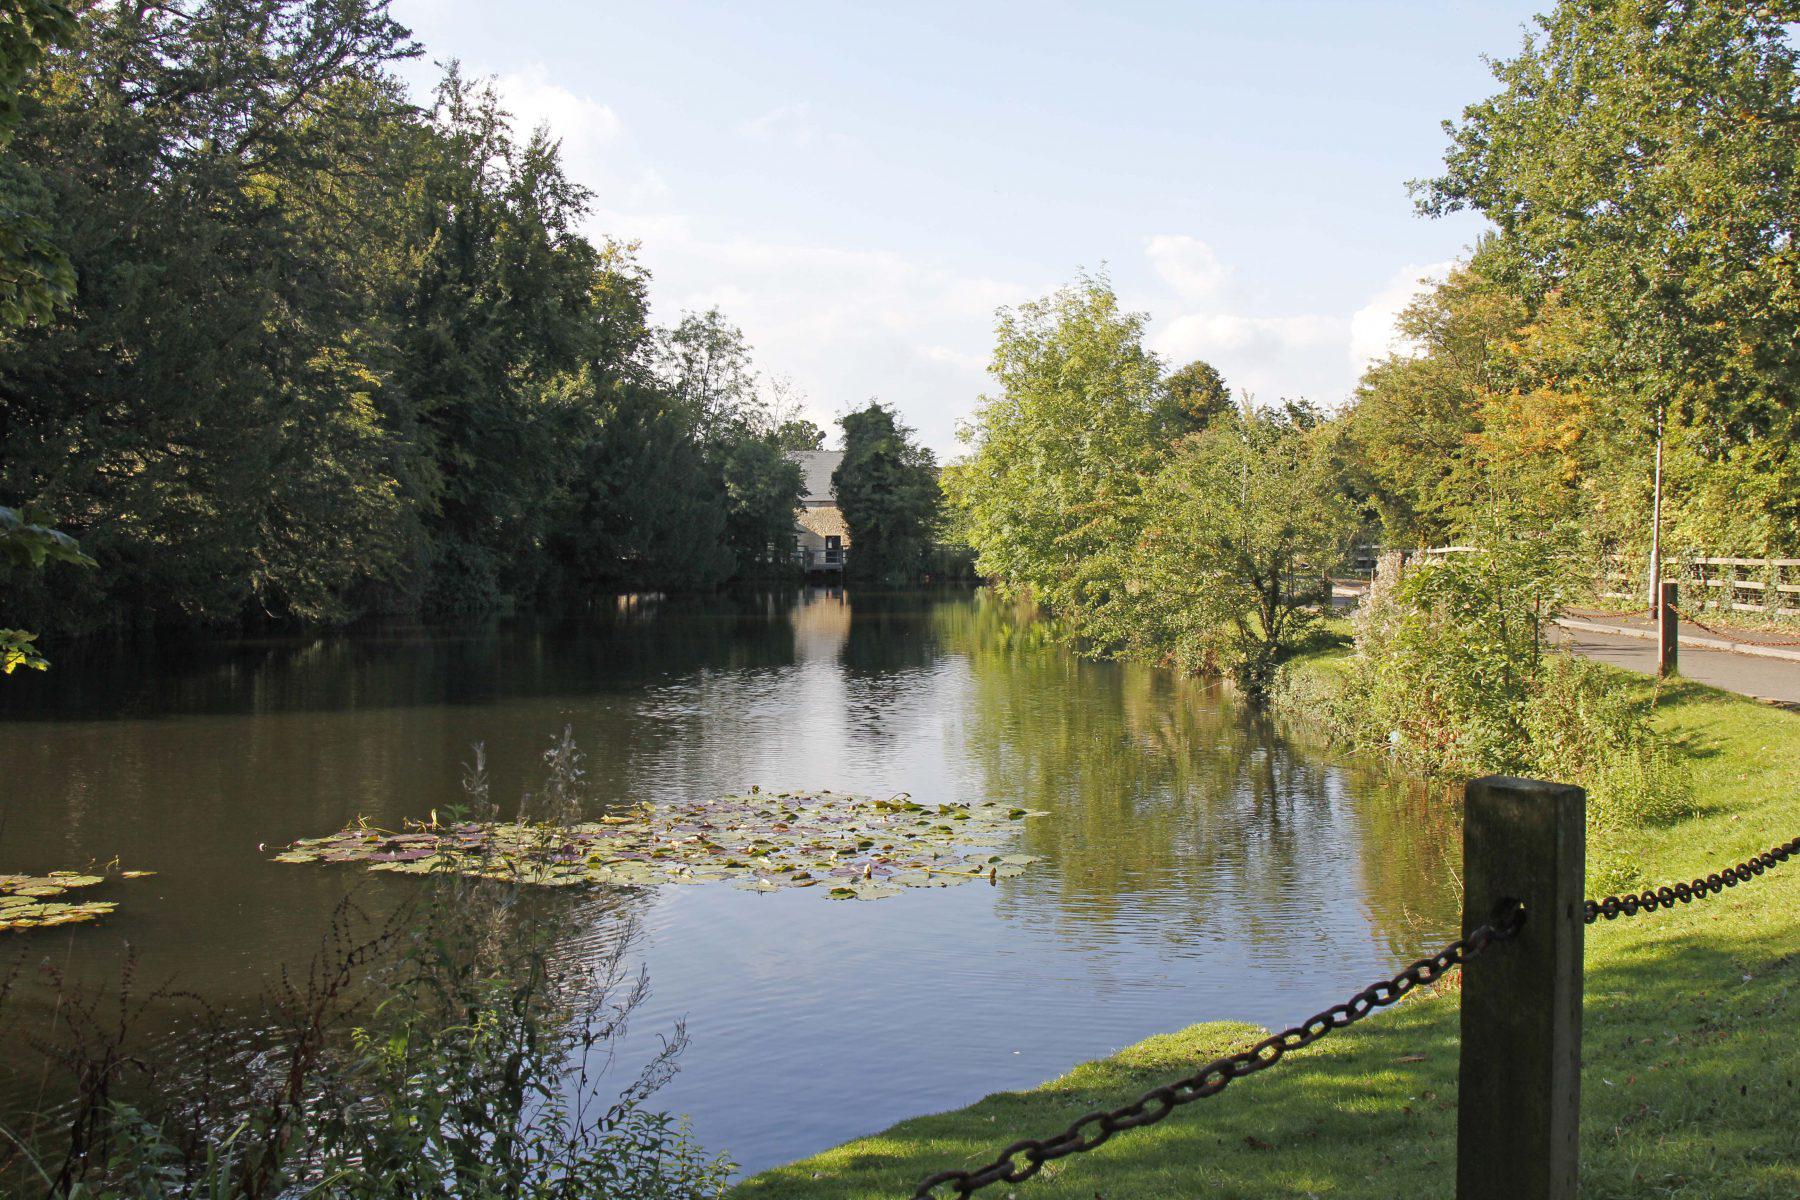 The moat at Holton Park